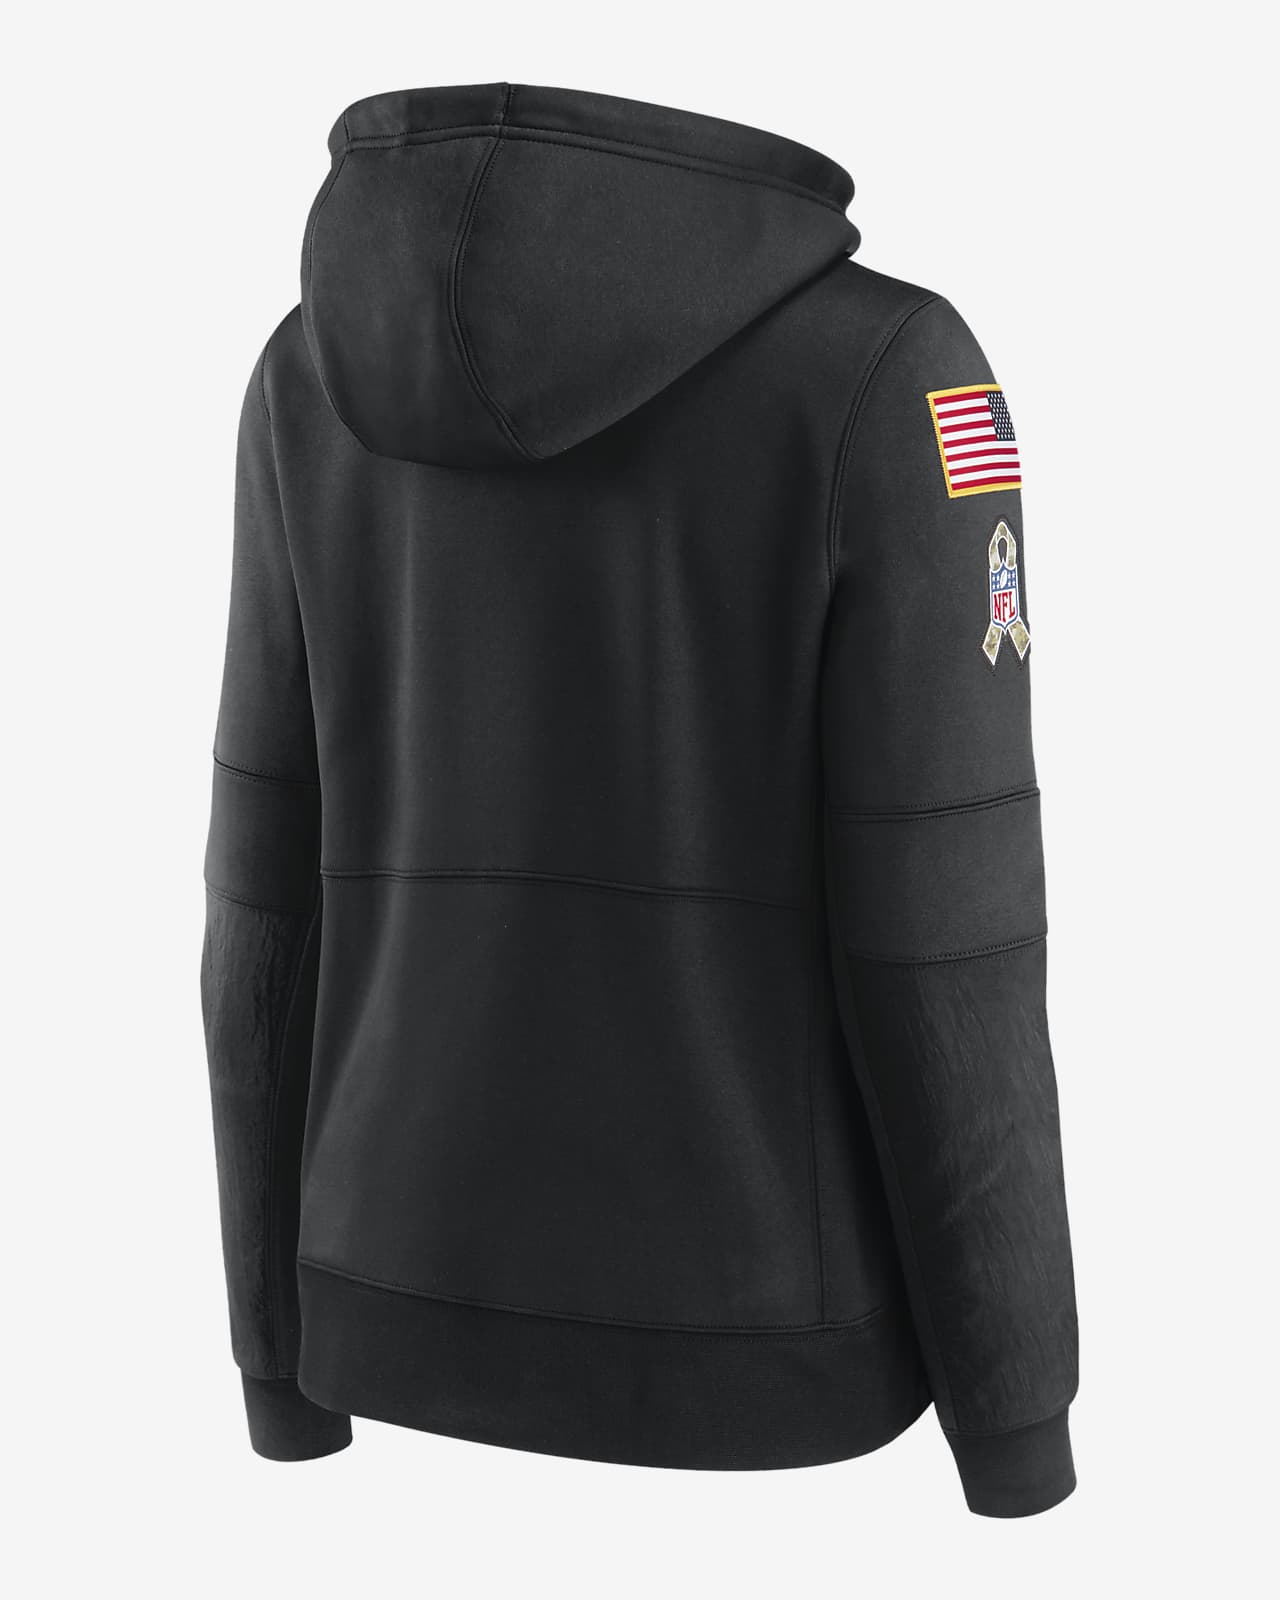 2020 nfl salute to service hoodie